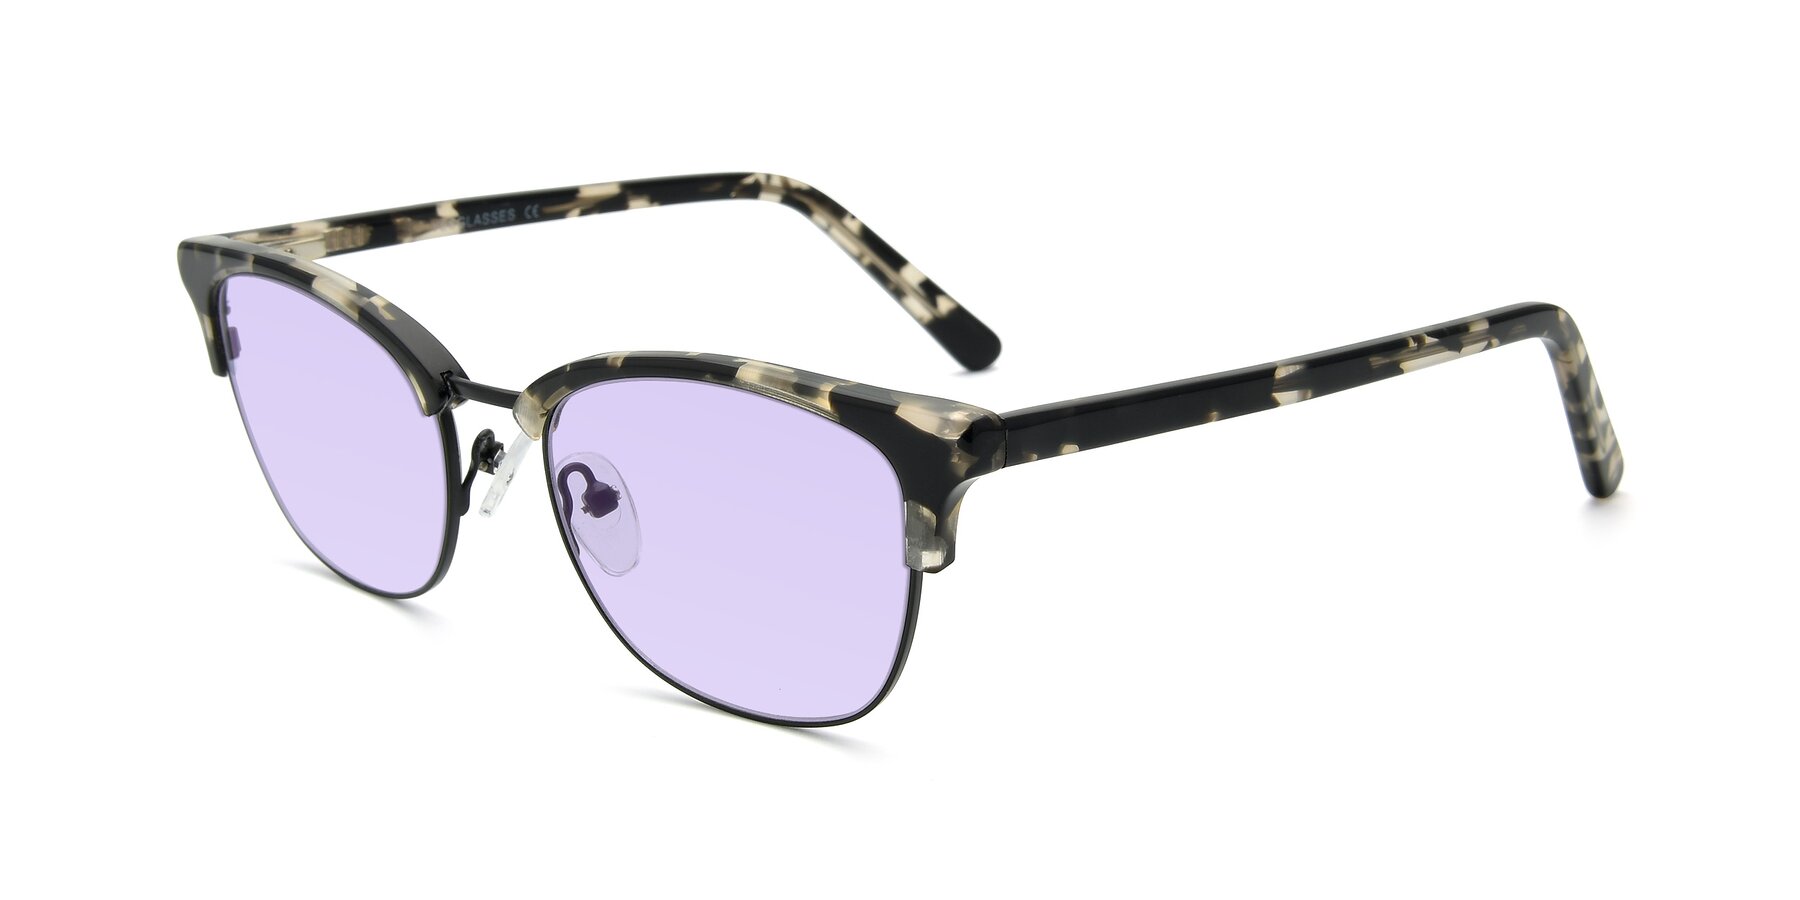 Angle of 17463 in Black-Tortoise with Light Purple Tinted Lenses